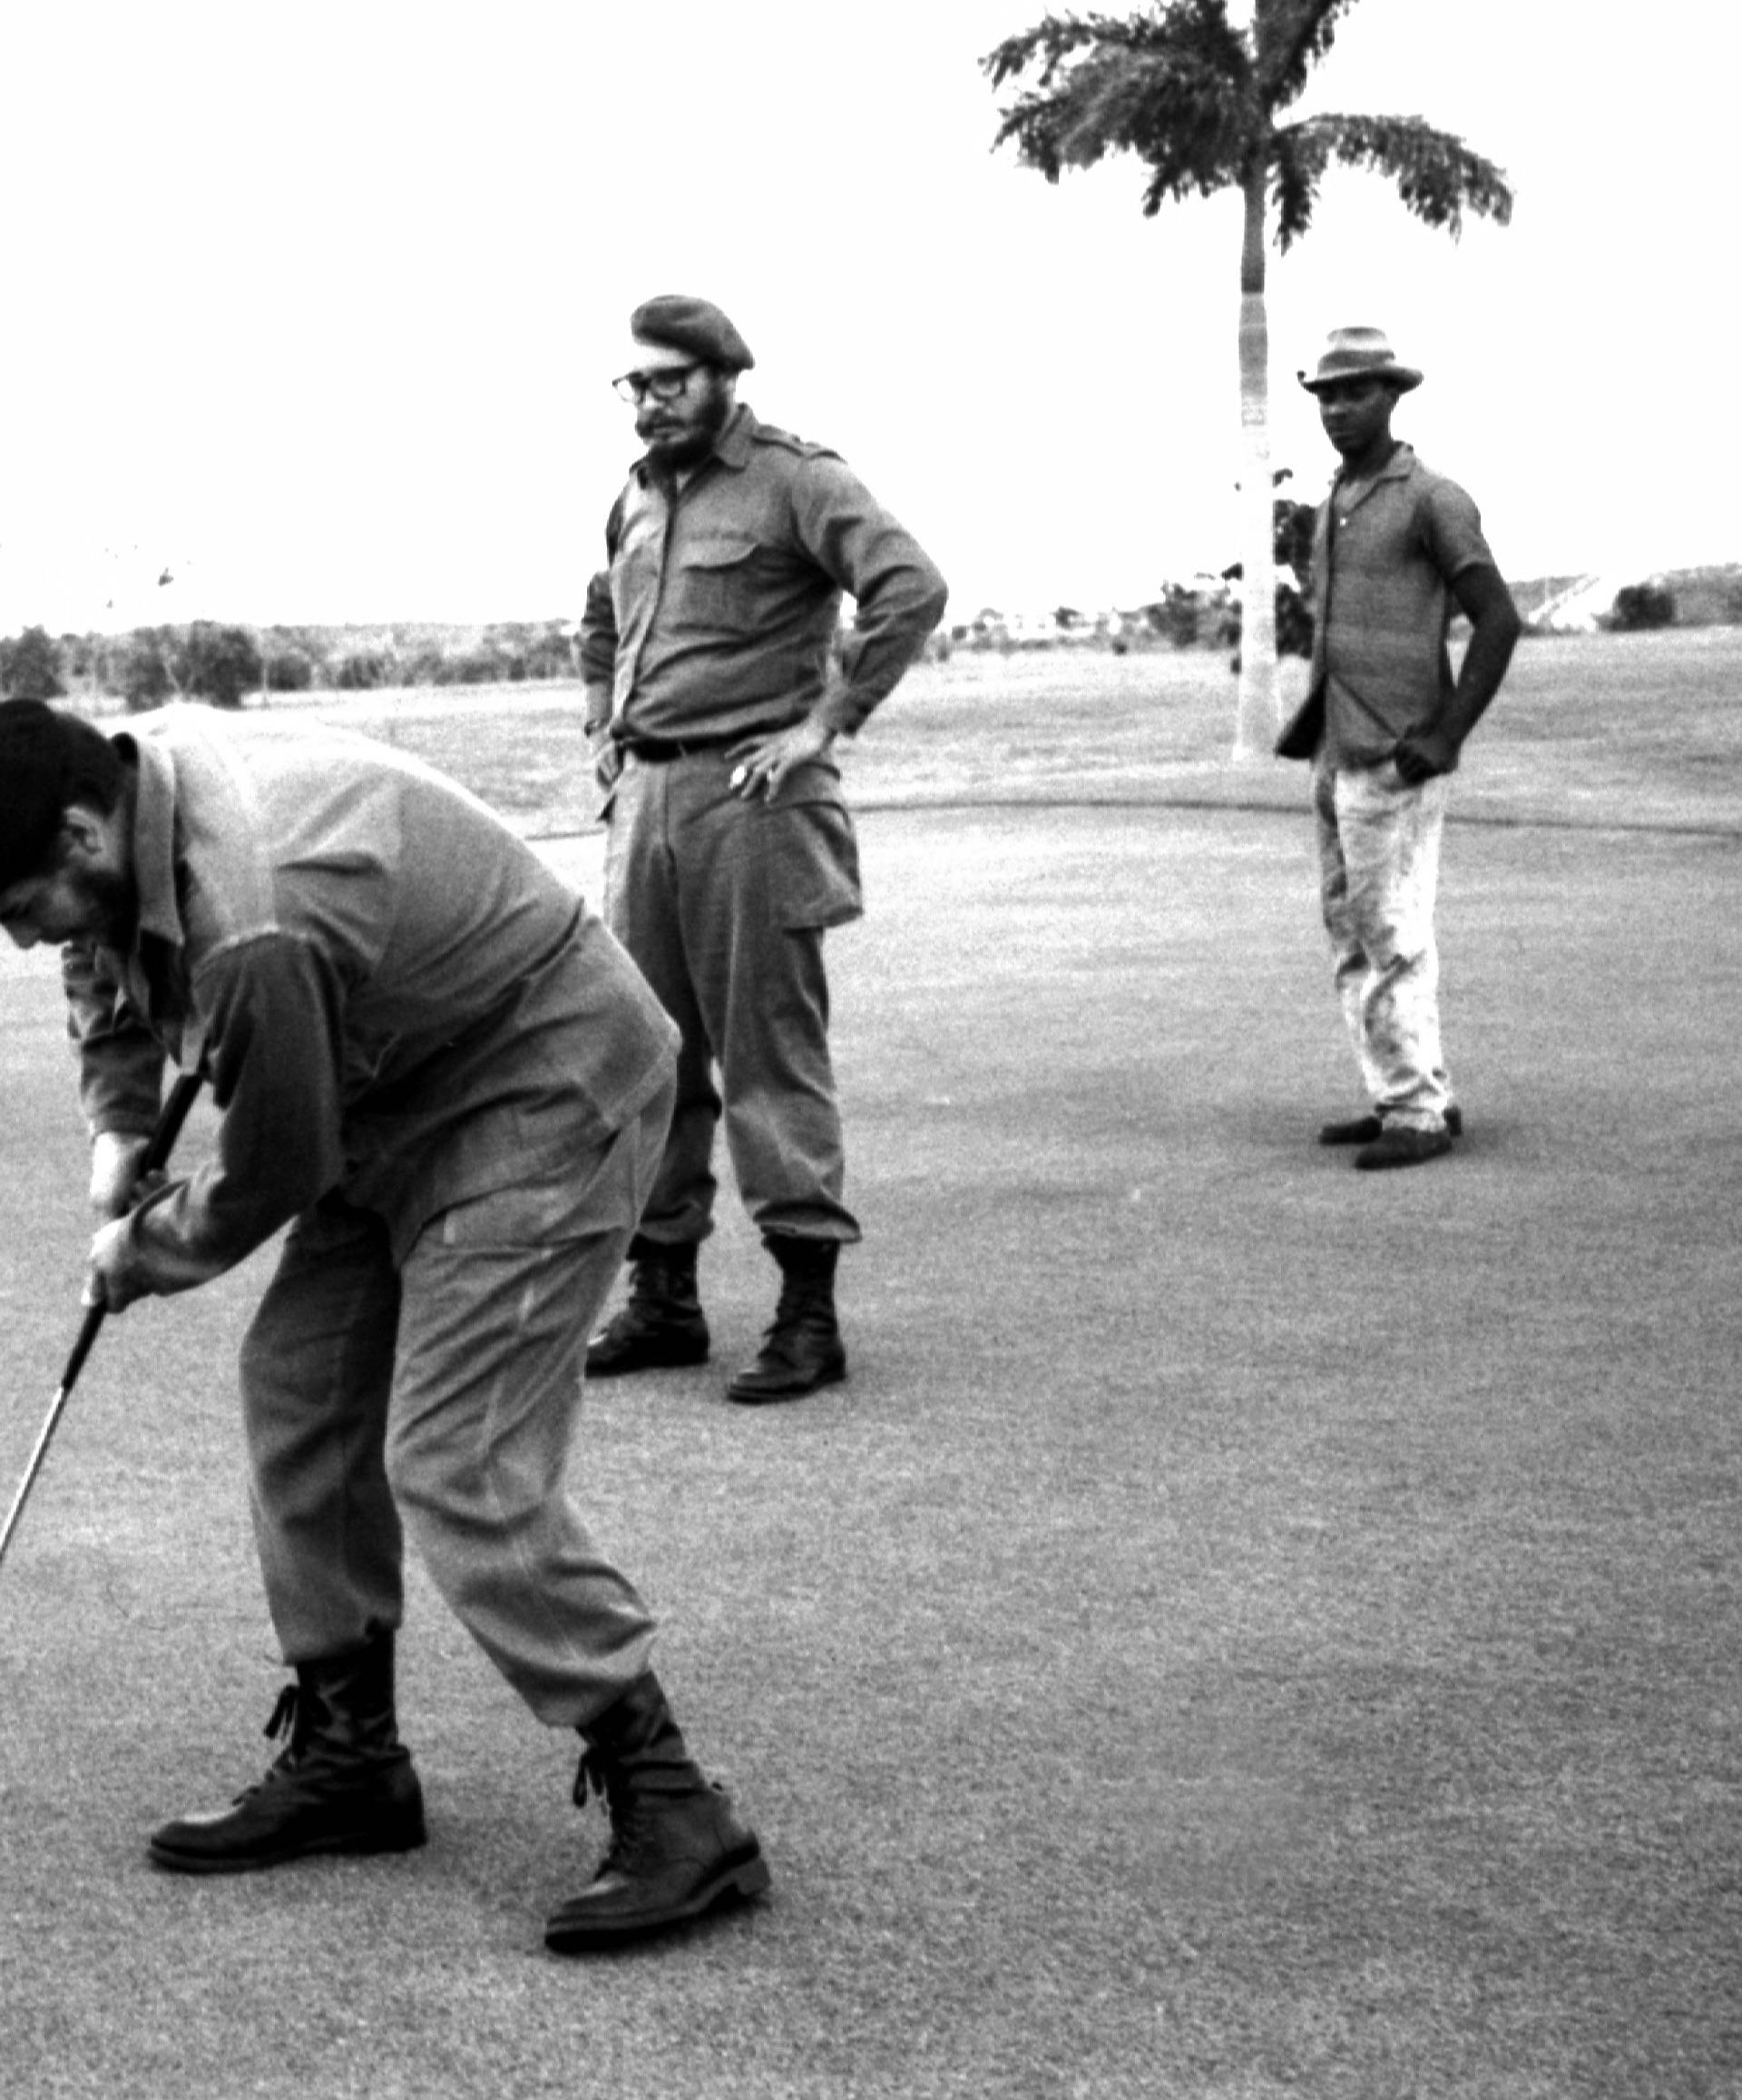 File photo of Ernesto Che Guevara playing golf as Fidel Castro stands behind him at Colina Villareal in Havana